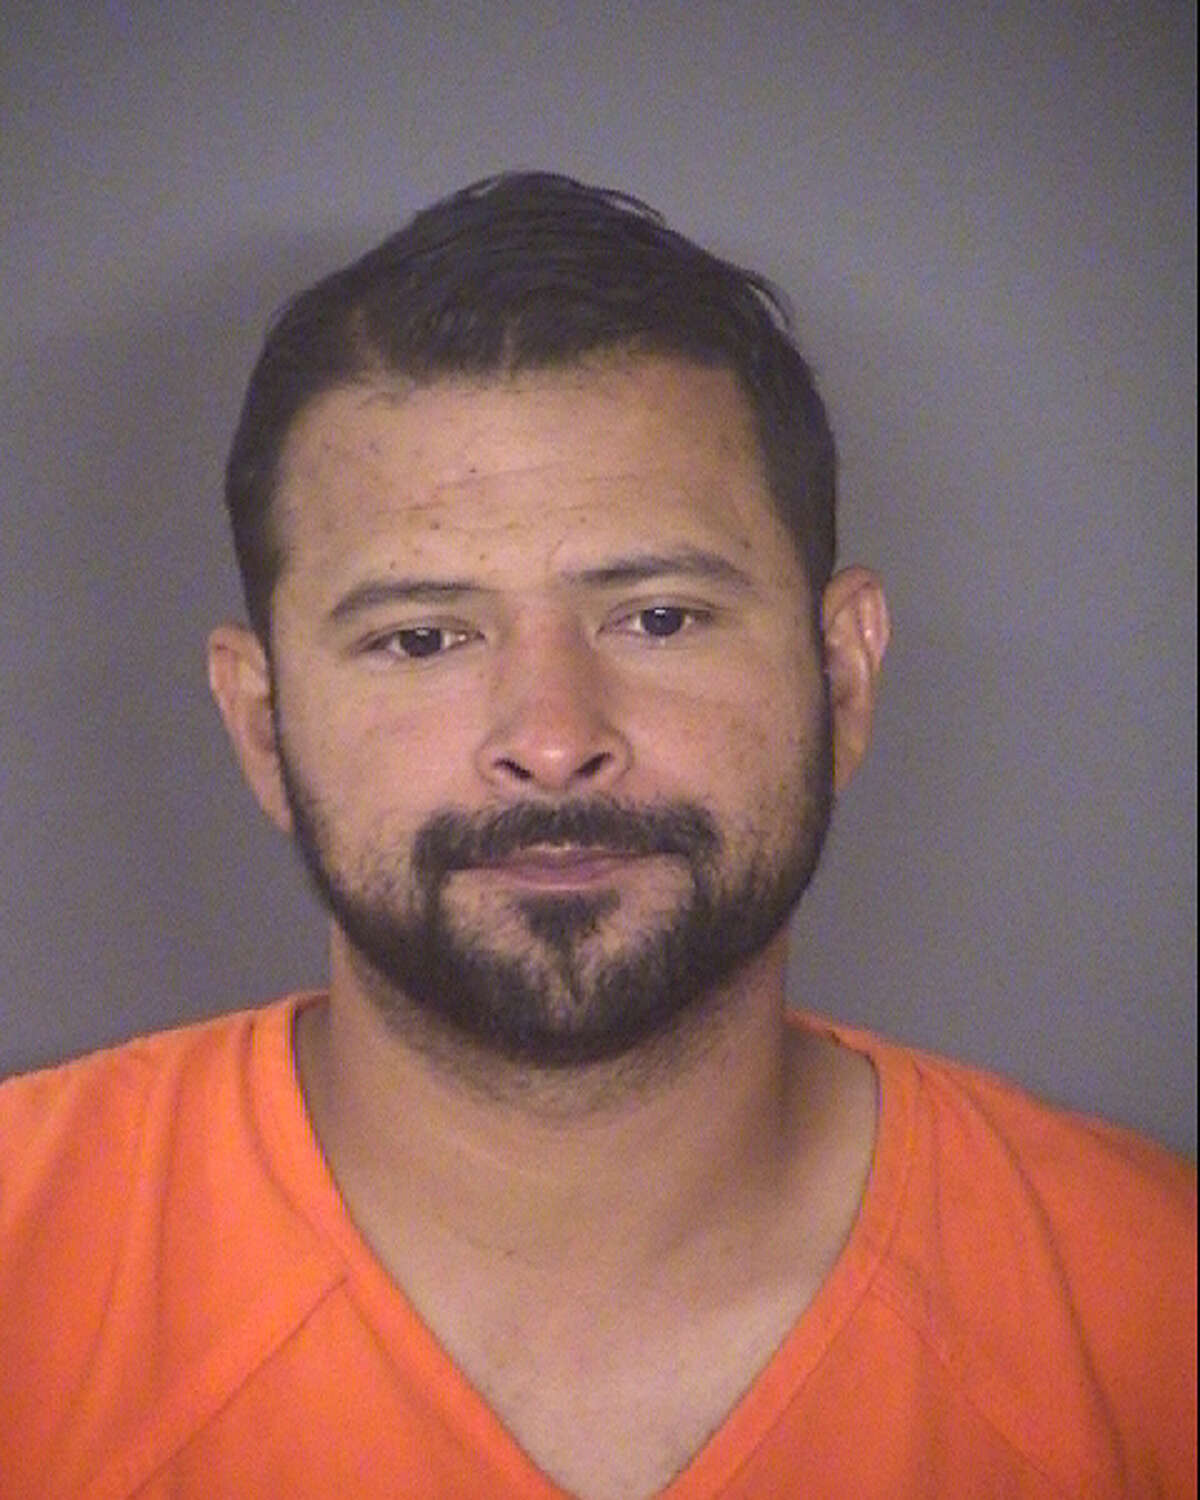 Juan Carlos Chavez was indicted for indecency with a child on May 8, 2019.